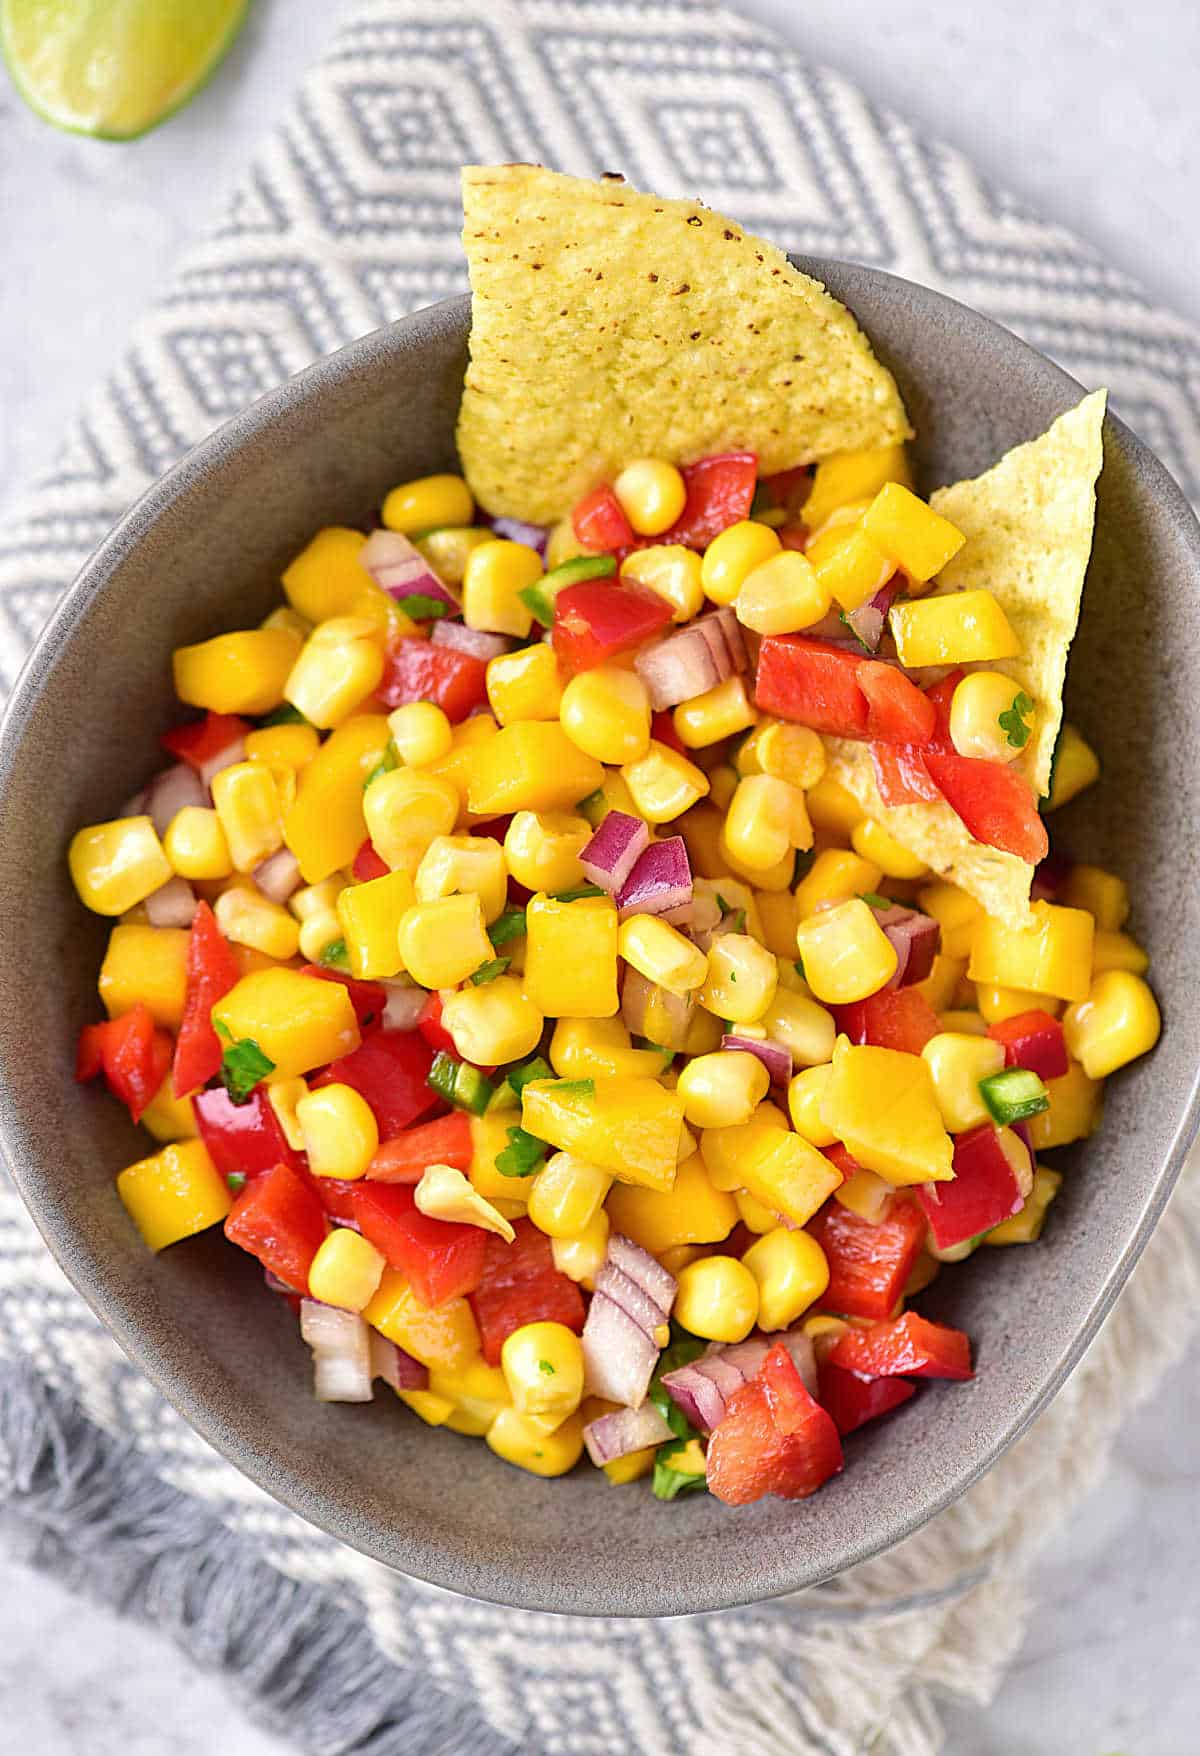 Top view of grey bowl with mango corn salsa with chips. Patterned grey and white cloth underneath. 